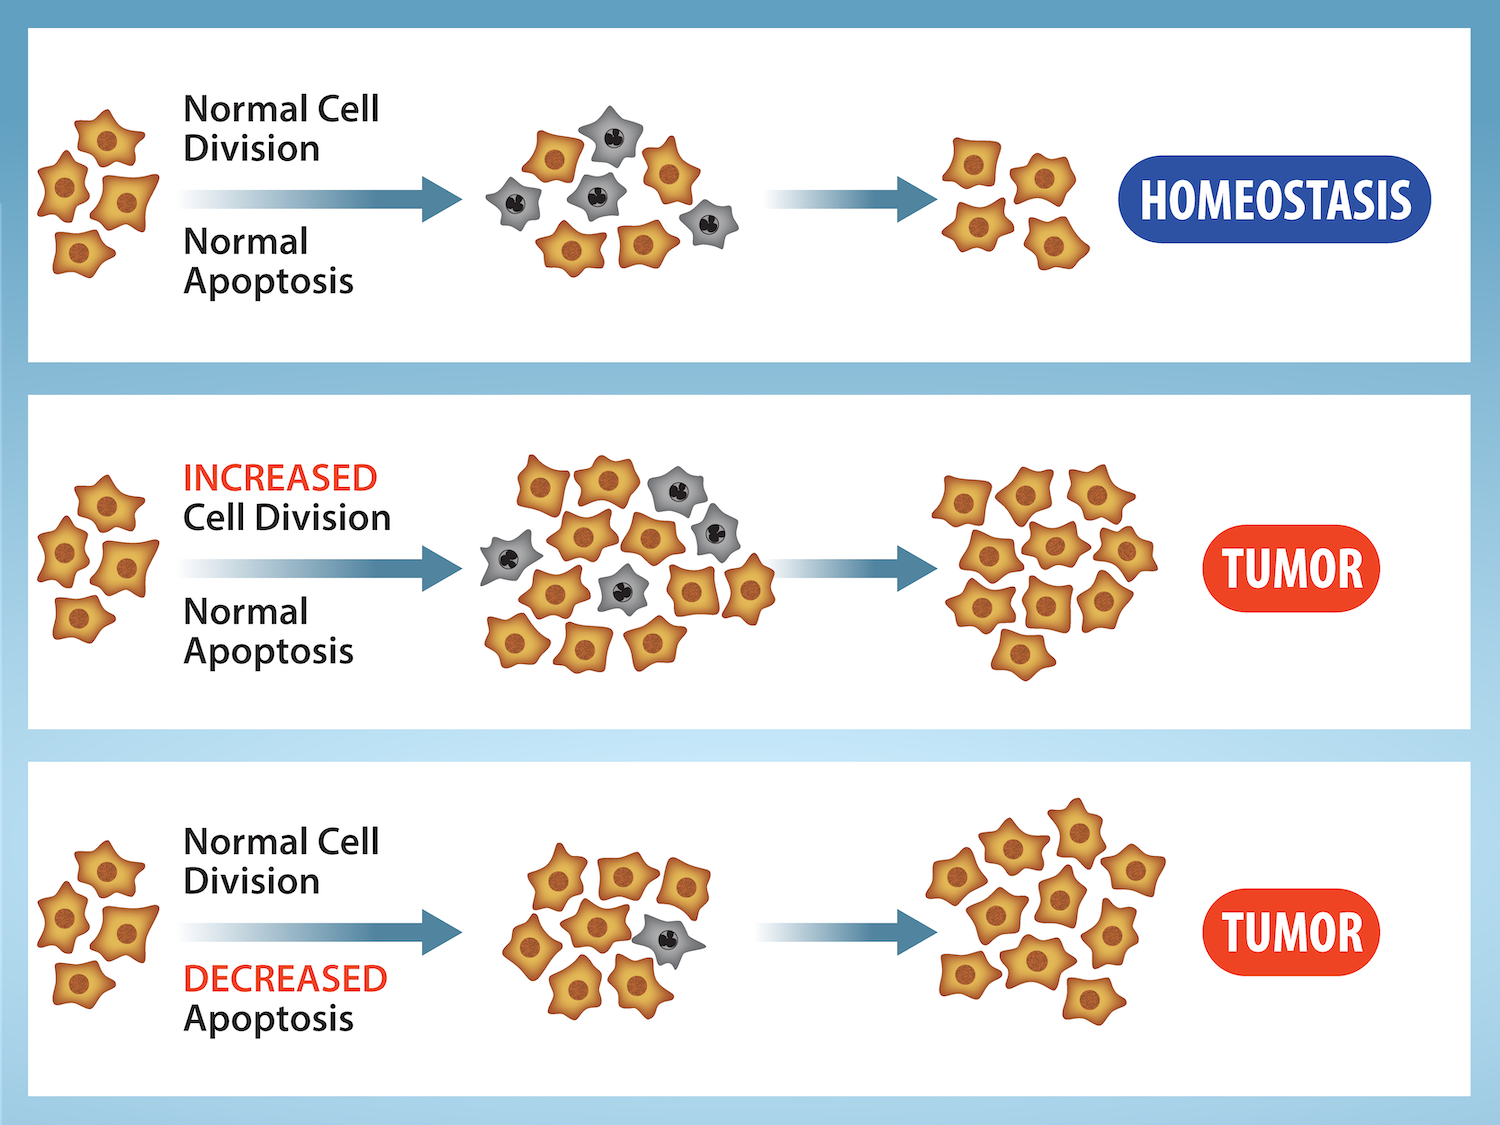 Three situations are shown.  In the first, normal cell division and normal apoptosis creates a balanced mixture of cells and results in homeostasis. In the second, increased cell division and normal apoptosis results in a tumor. In the third, normal cell division and decreased apoptosis results in a tumor.